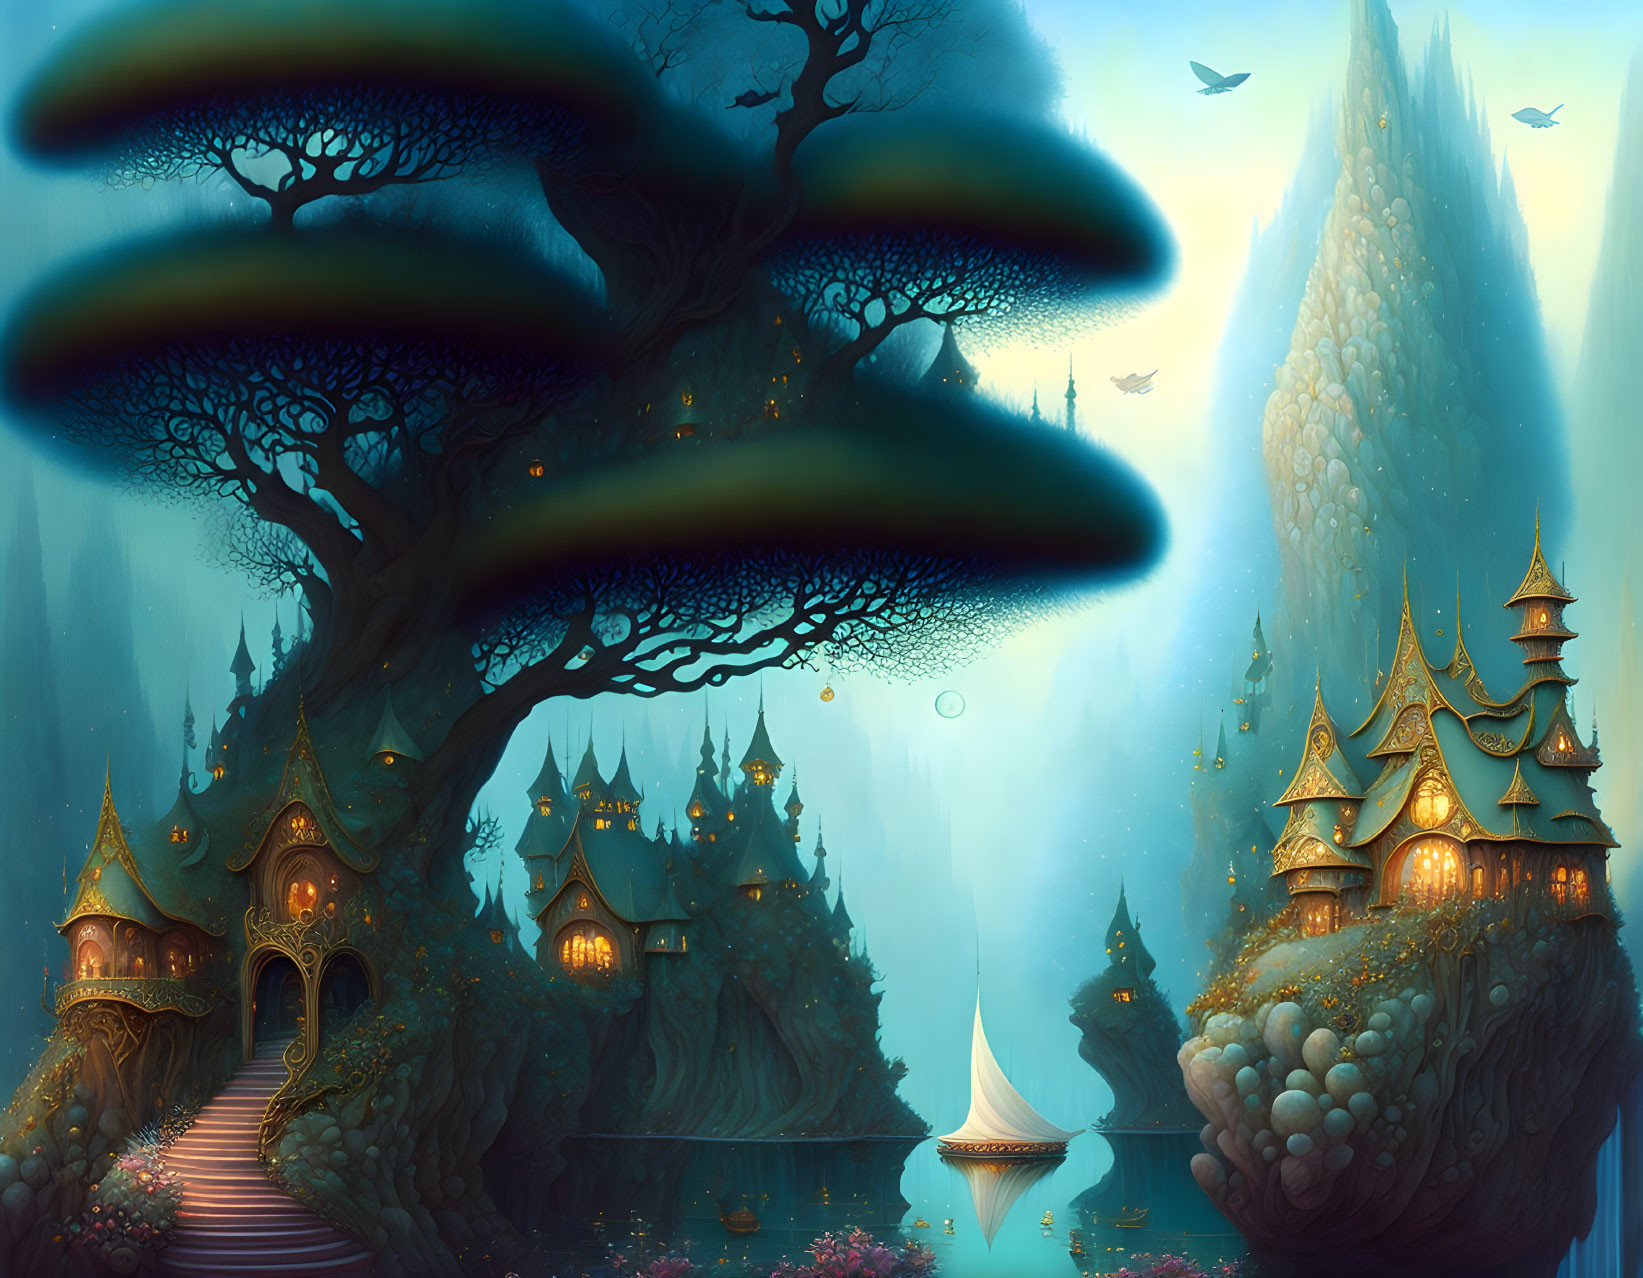 Fantasy landscape with oversized mushrooms, ethereal trees, castles, glowing flora, birds, and